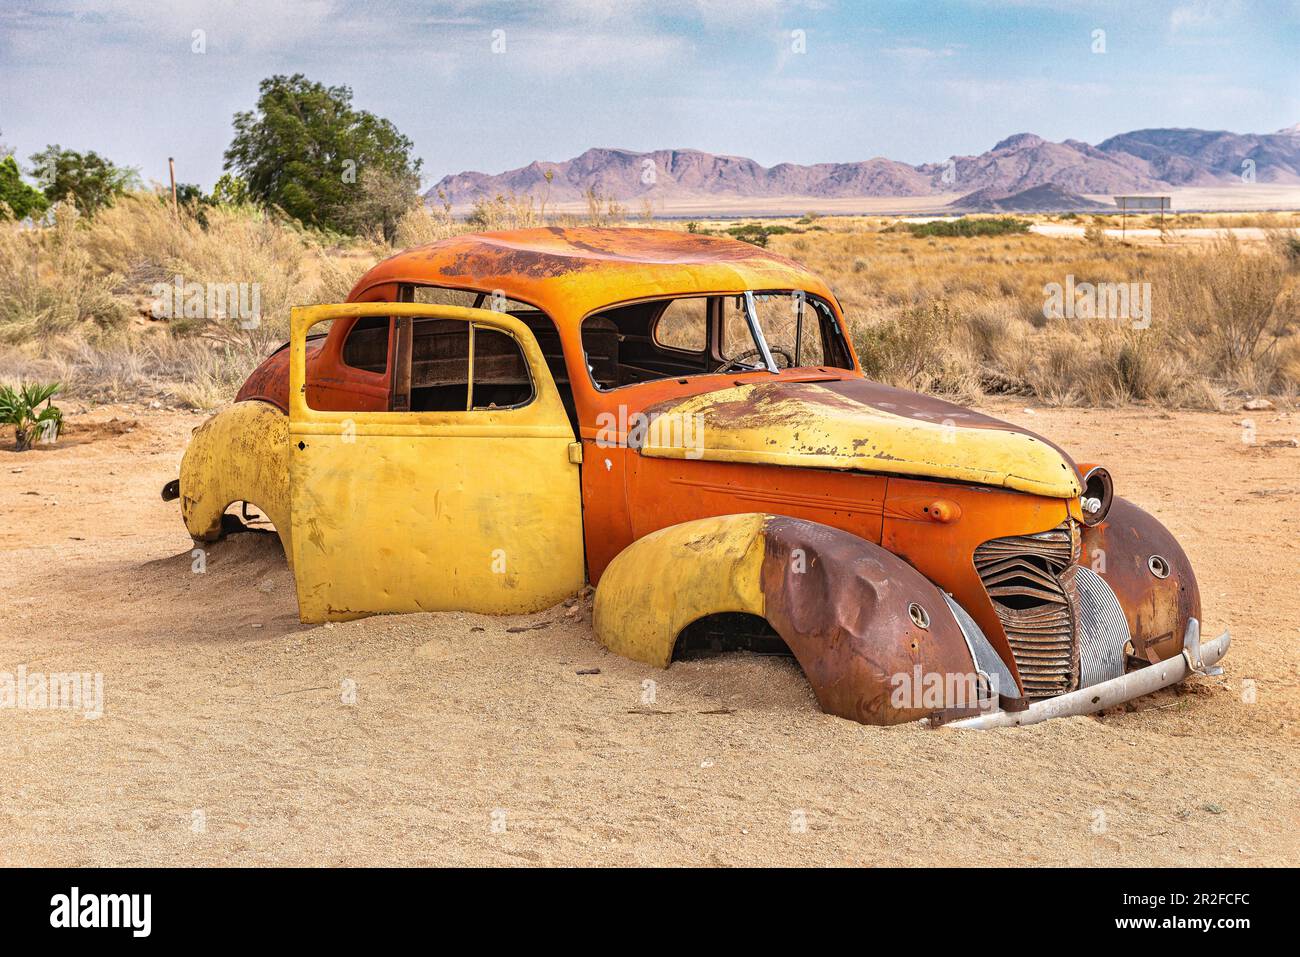 Old cars, discarded and parked, Solitaire roadhouse, C19 road, Solitaire, Namibia, South Africa Stock Photo